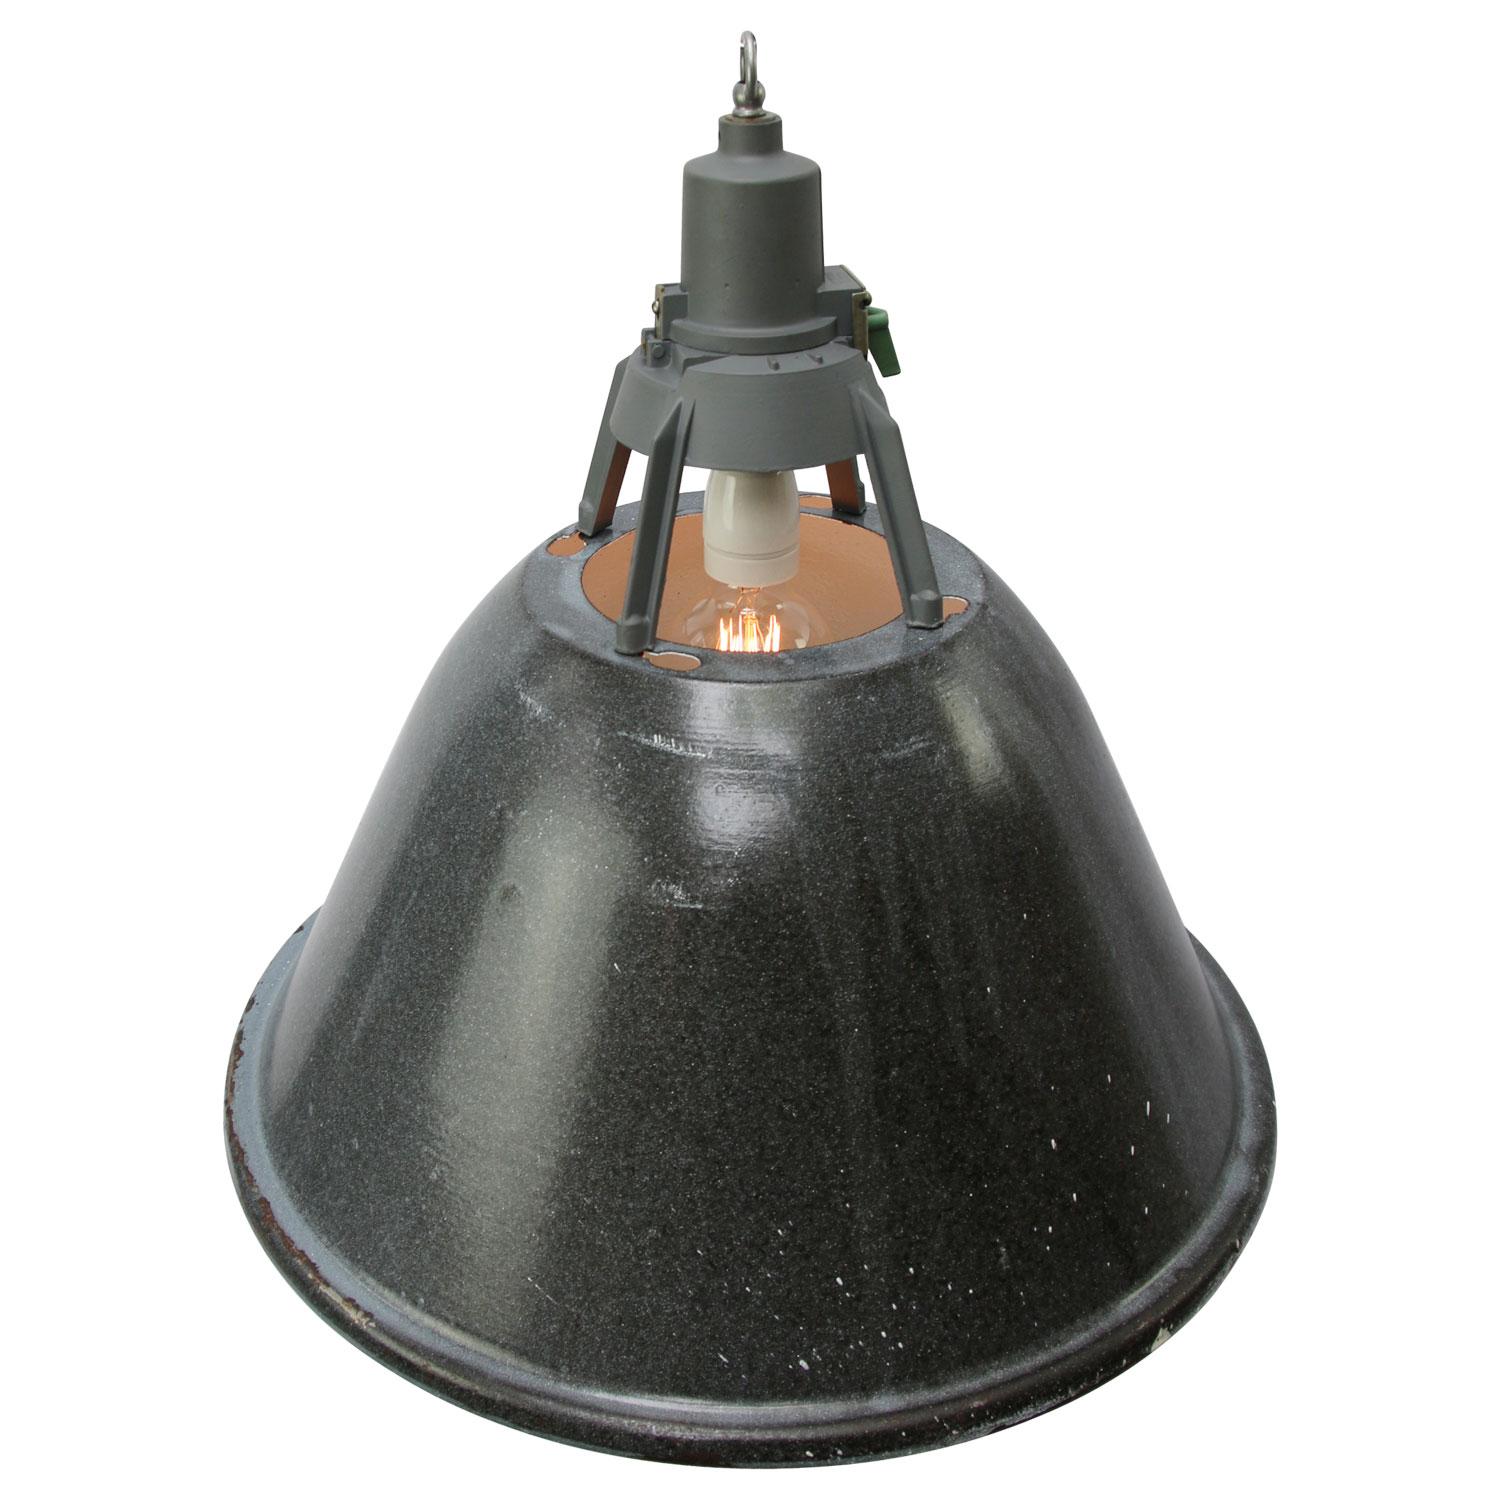 Enamel industrial pendant
Gray enamel shade, white inside.
Dark gray / green cast aluminum top

Weight: 2.90 kg / 6.4 lb

Priced per individual item. All lamps have been made suitable by international standards for incandescent light bulbs,